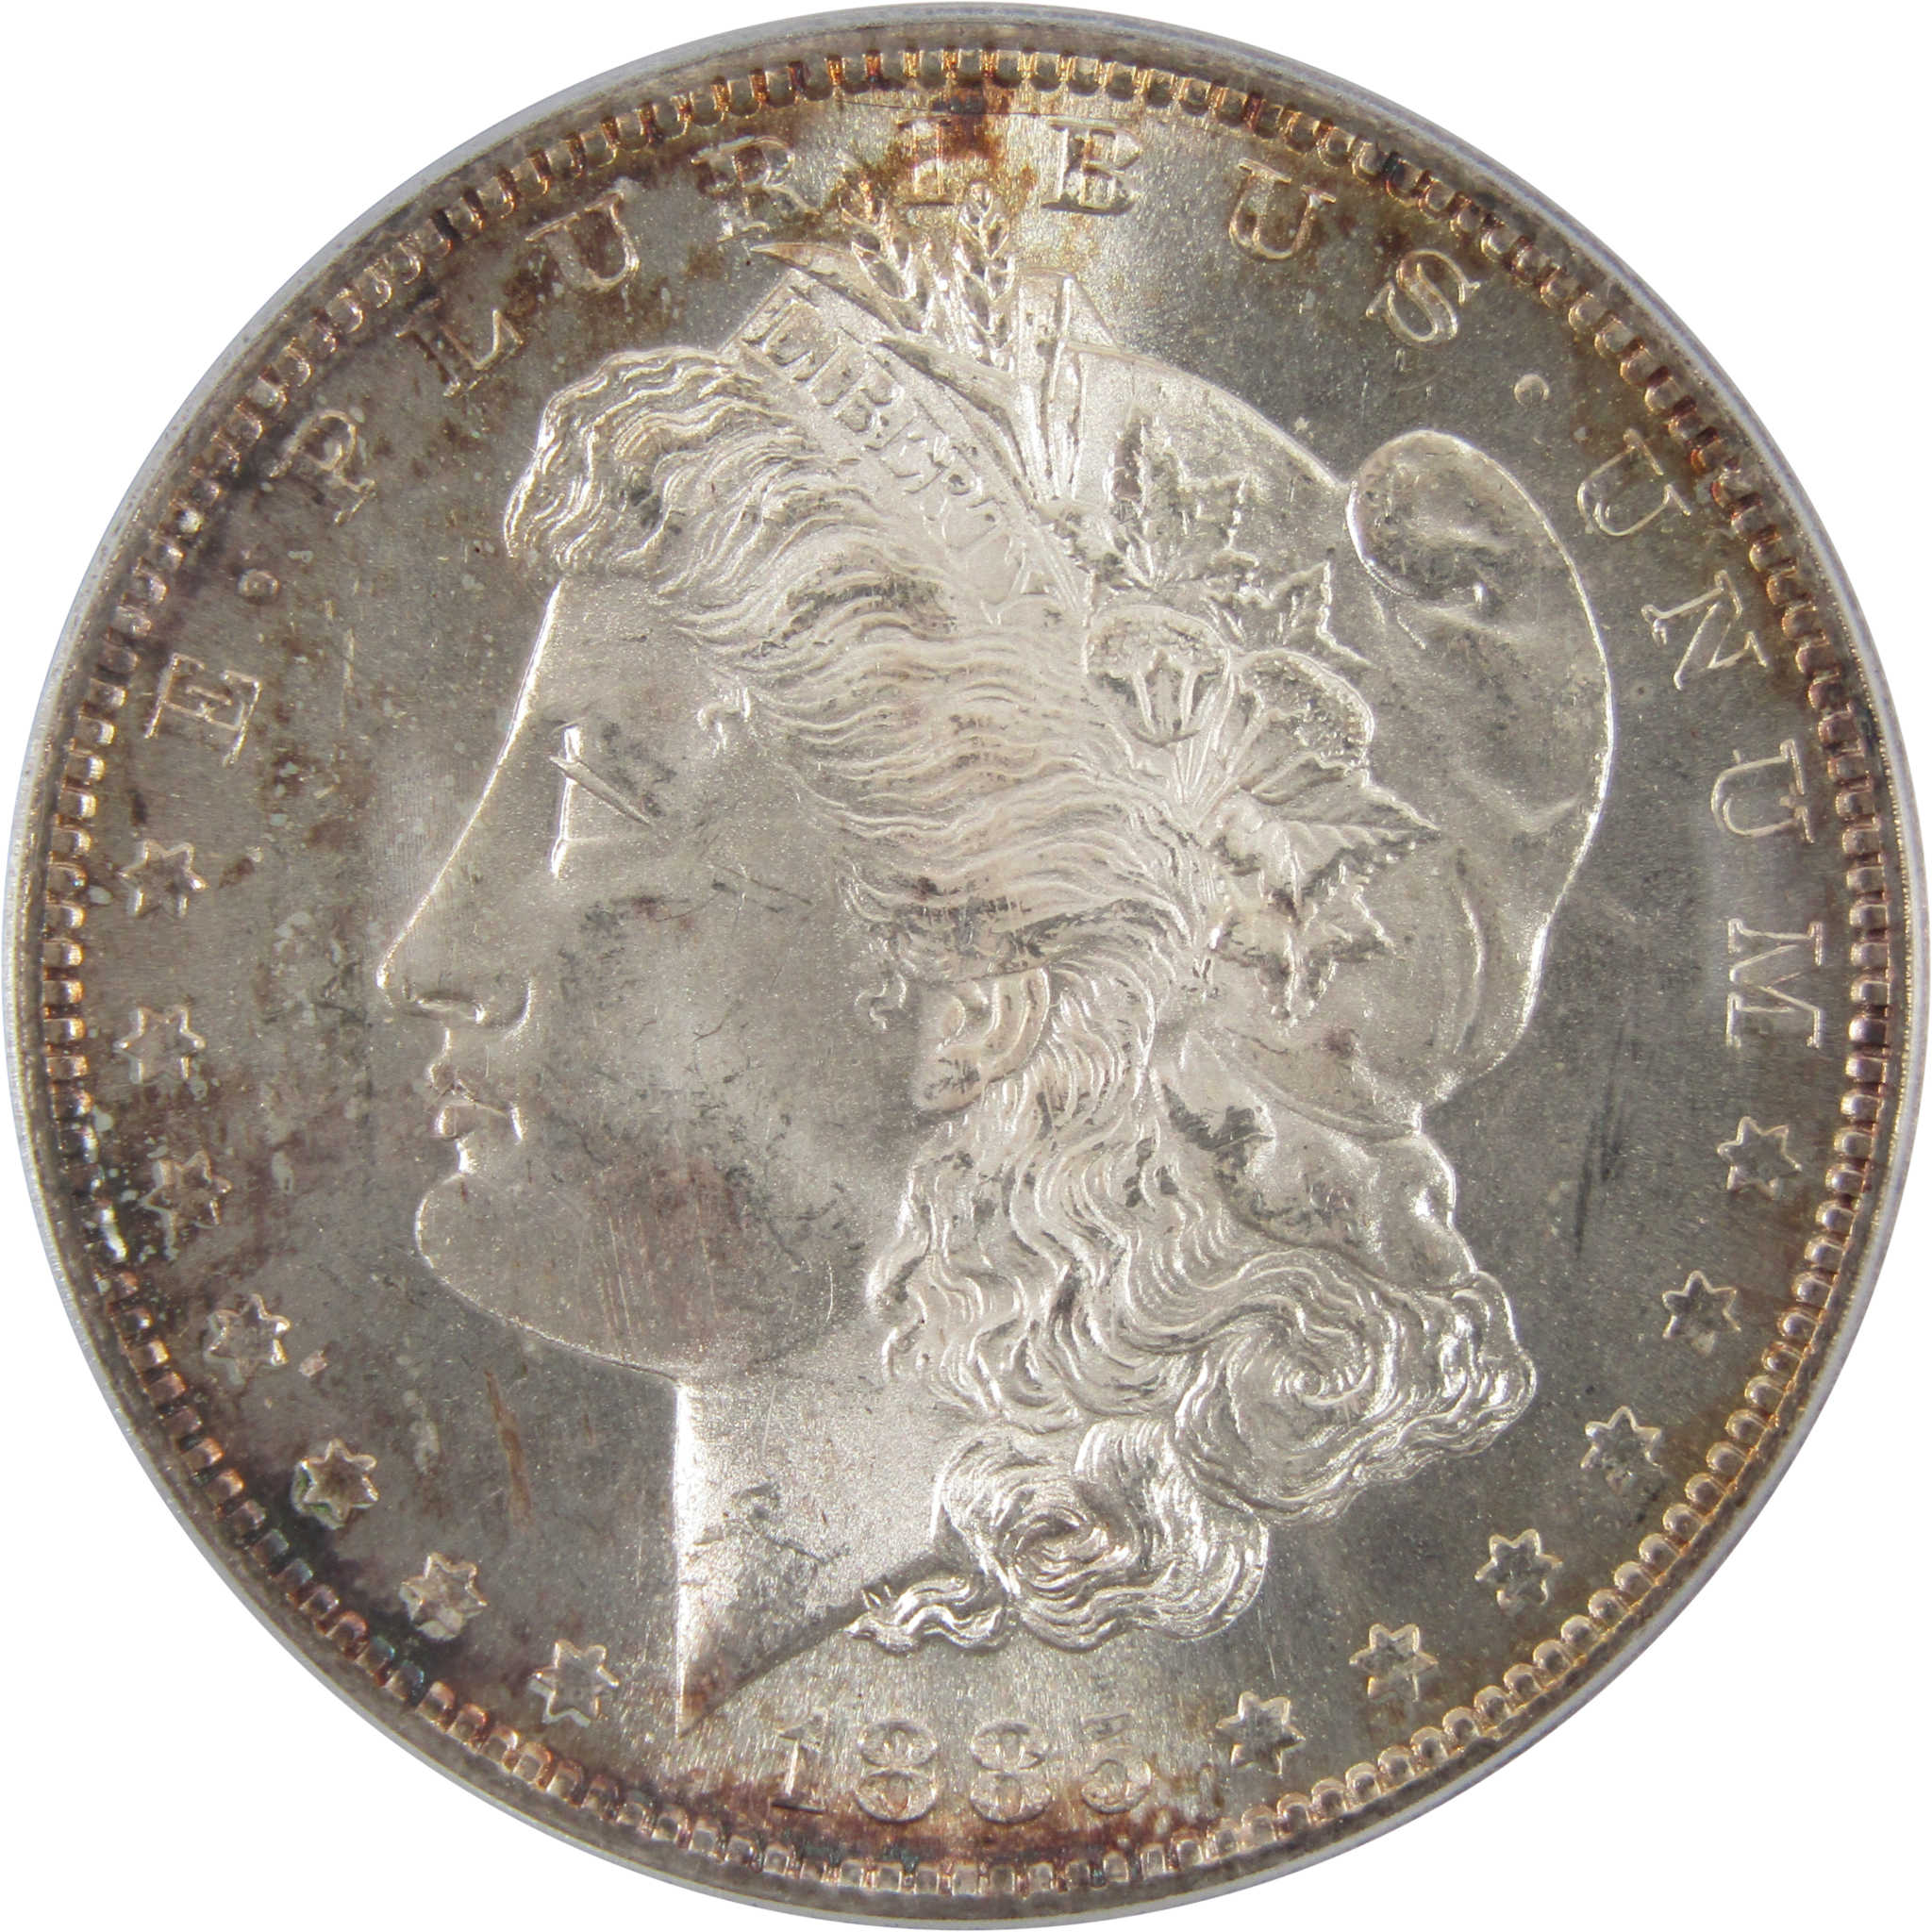 1885 S Morgan Dollar MS 64 PCGS 90% Silver $1 Unc SKU:CPC4002 - Morgan coin - Morgan silver dollar - Morgan silver dollar for sale - Profile Coins &amp; Collectibles